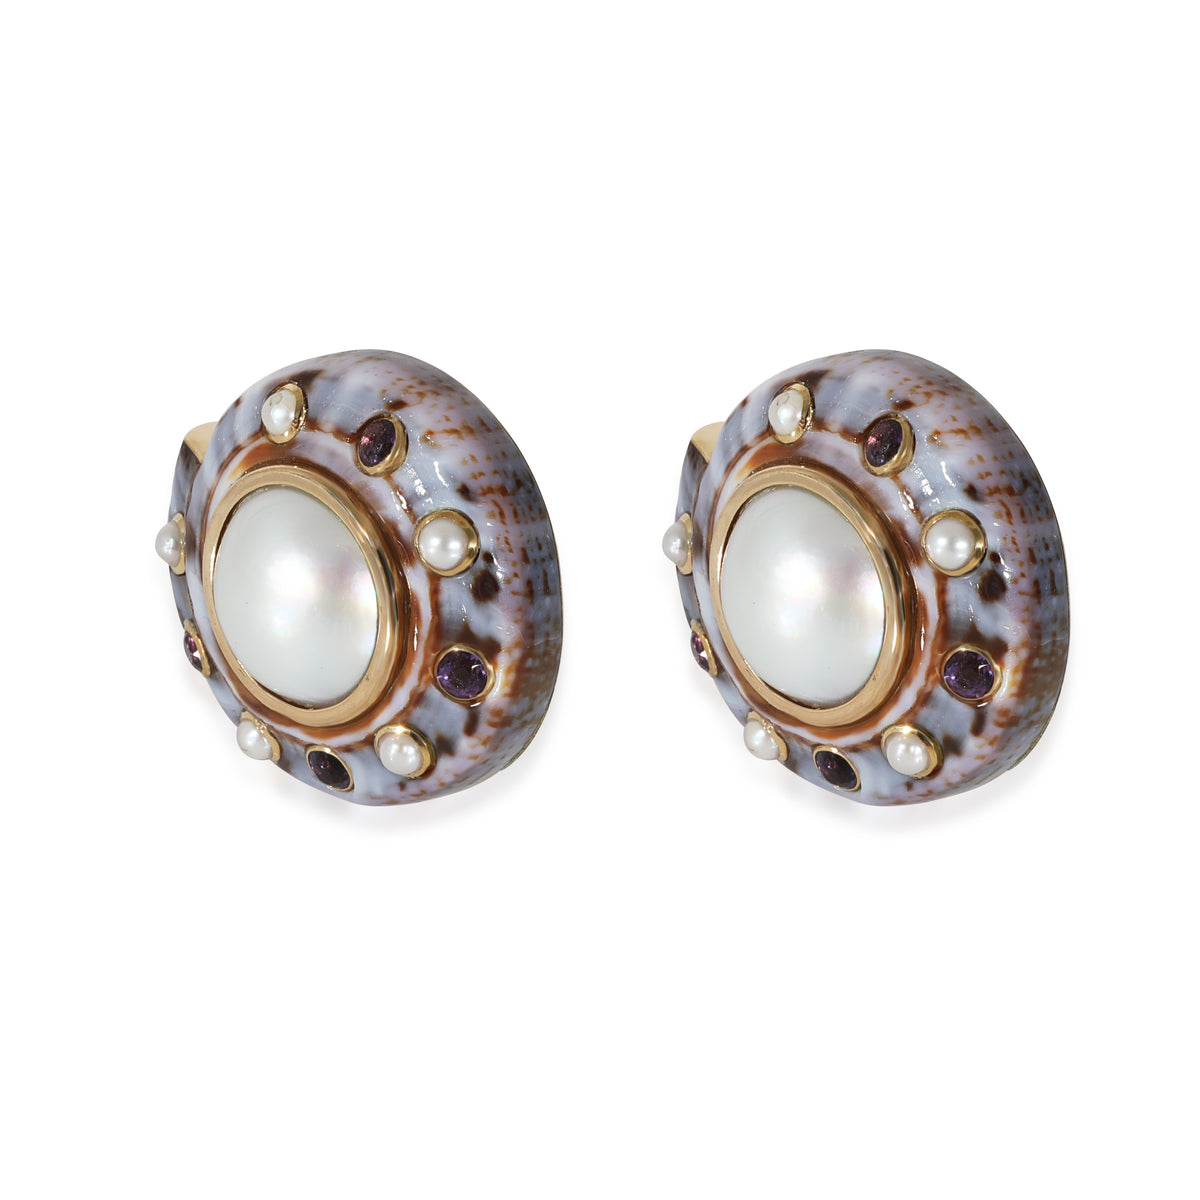 (Seaman Shepps) Mabe Pearl, Amethyst & Shell Earring in 18k Yellow Gold